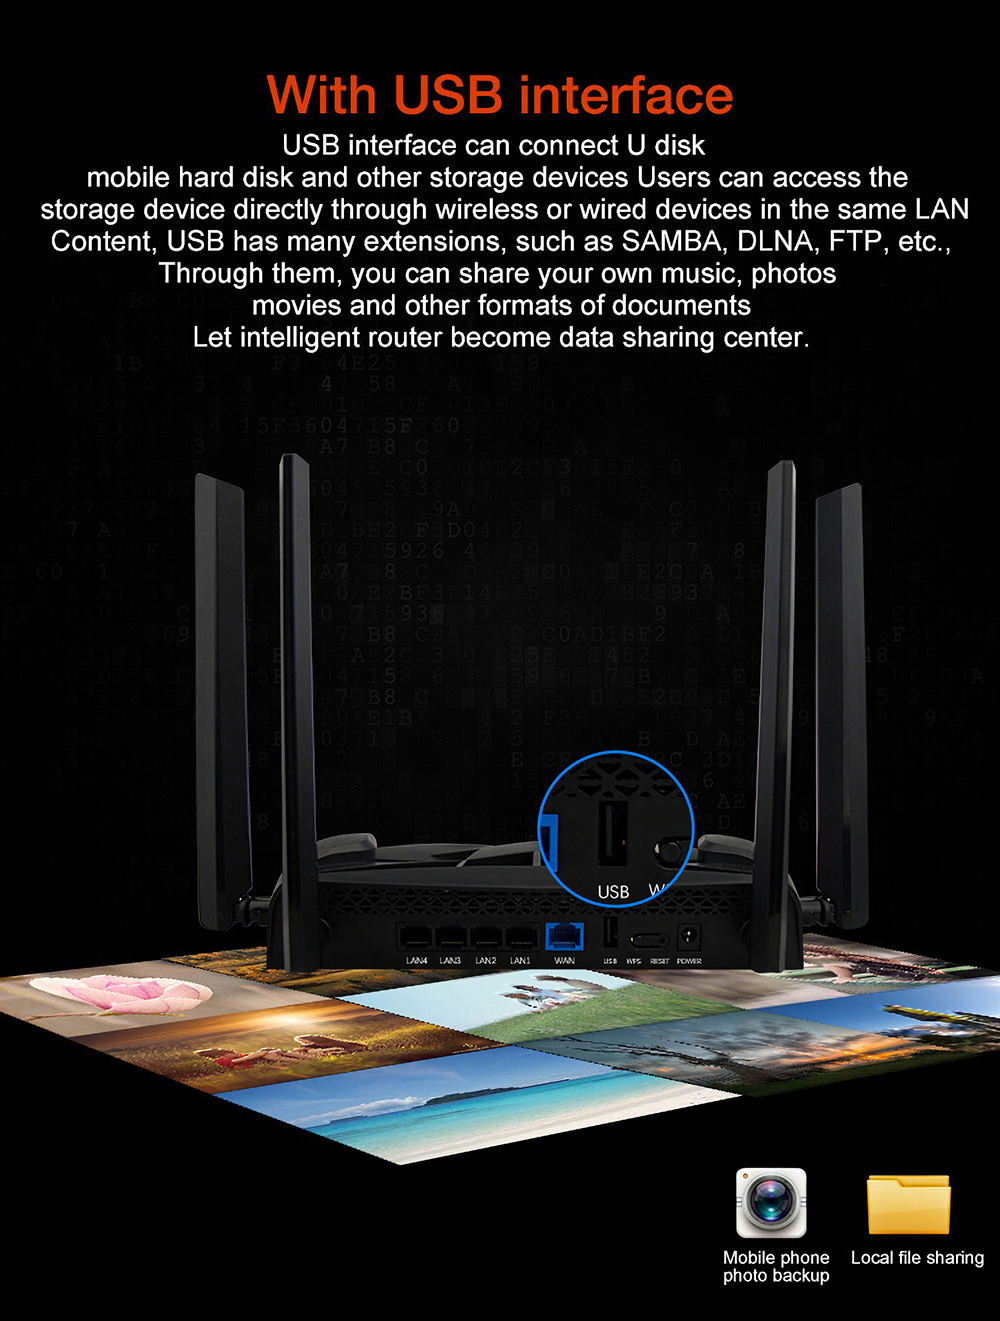 ZAPO-Z-2600-Dual-Band-Wireless-Router-2600Mbps-11AC-Gaming-Wifi-Router-with-USB-Port-4Antenna-1819946-7